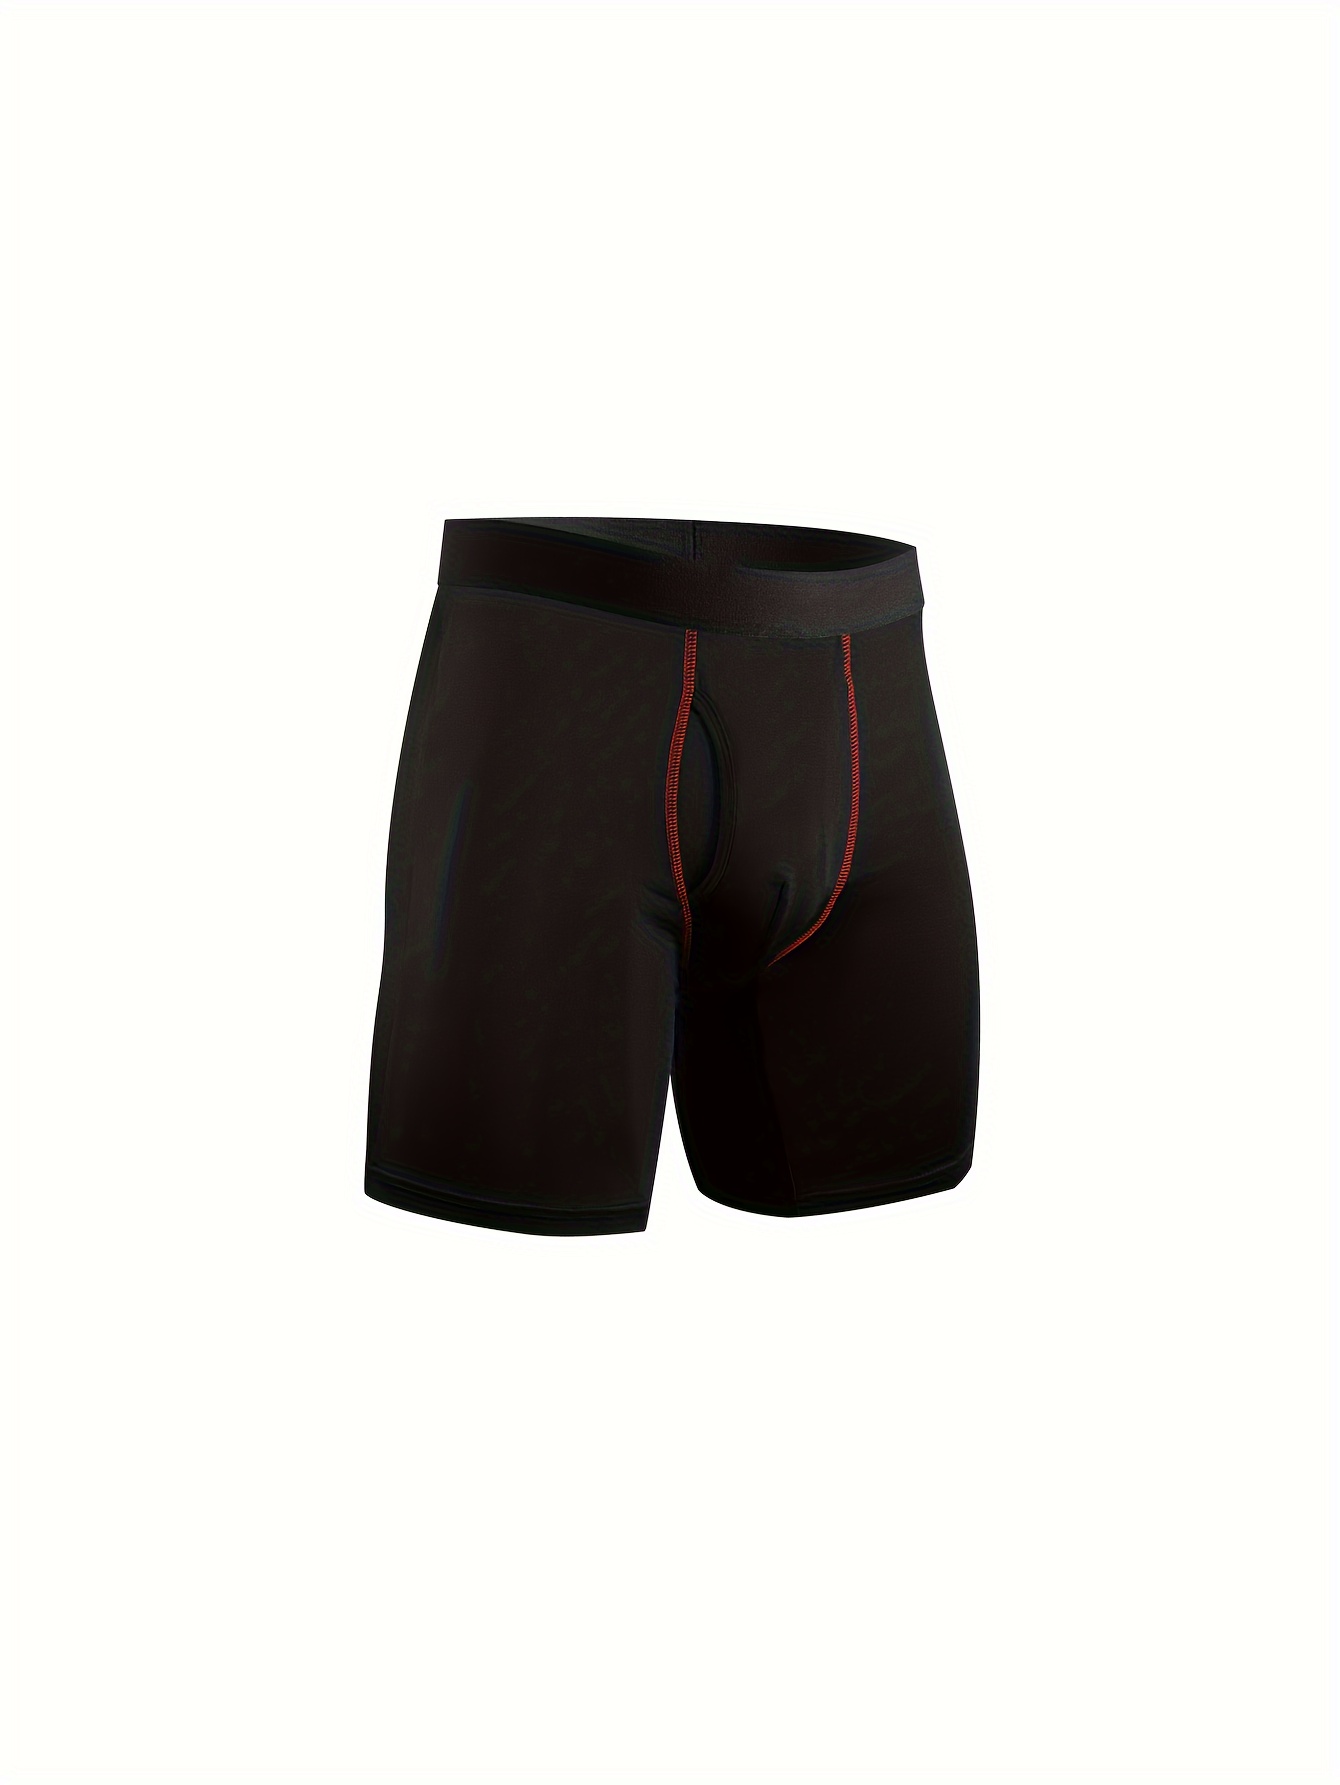 Boxers Vs Boxer Briefs Vs Trunks: What's The Difference?, 44% OFF